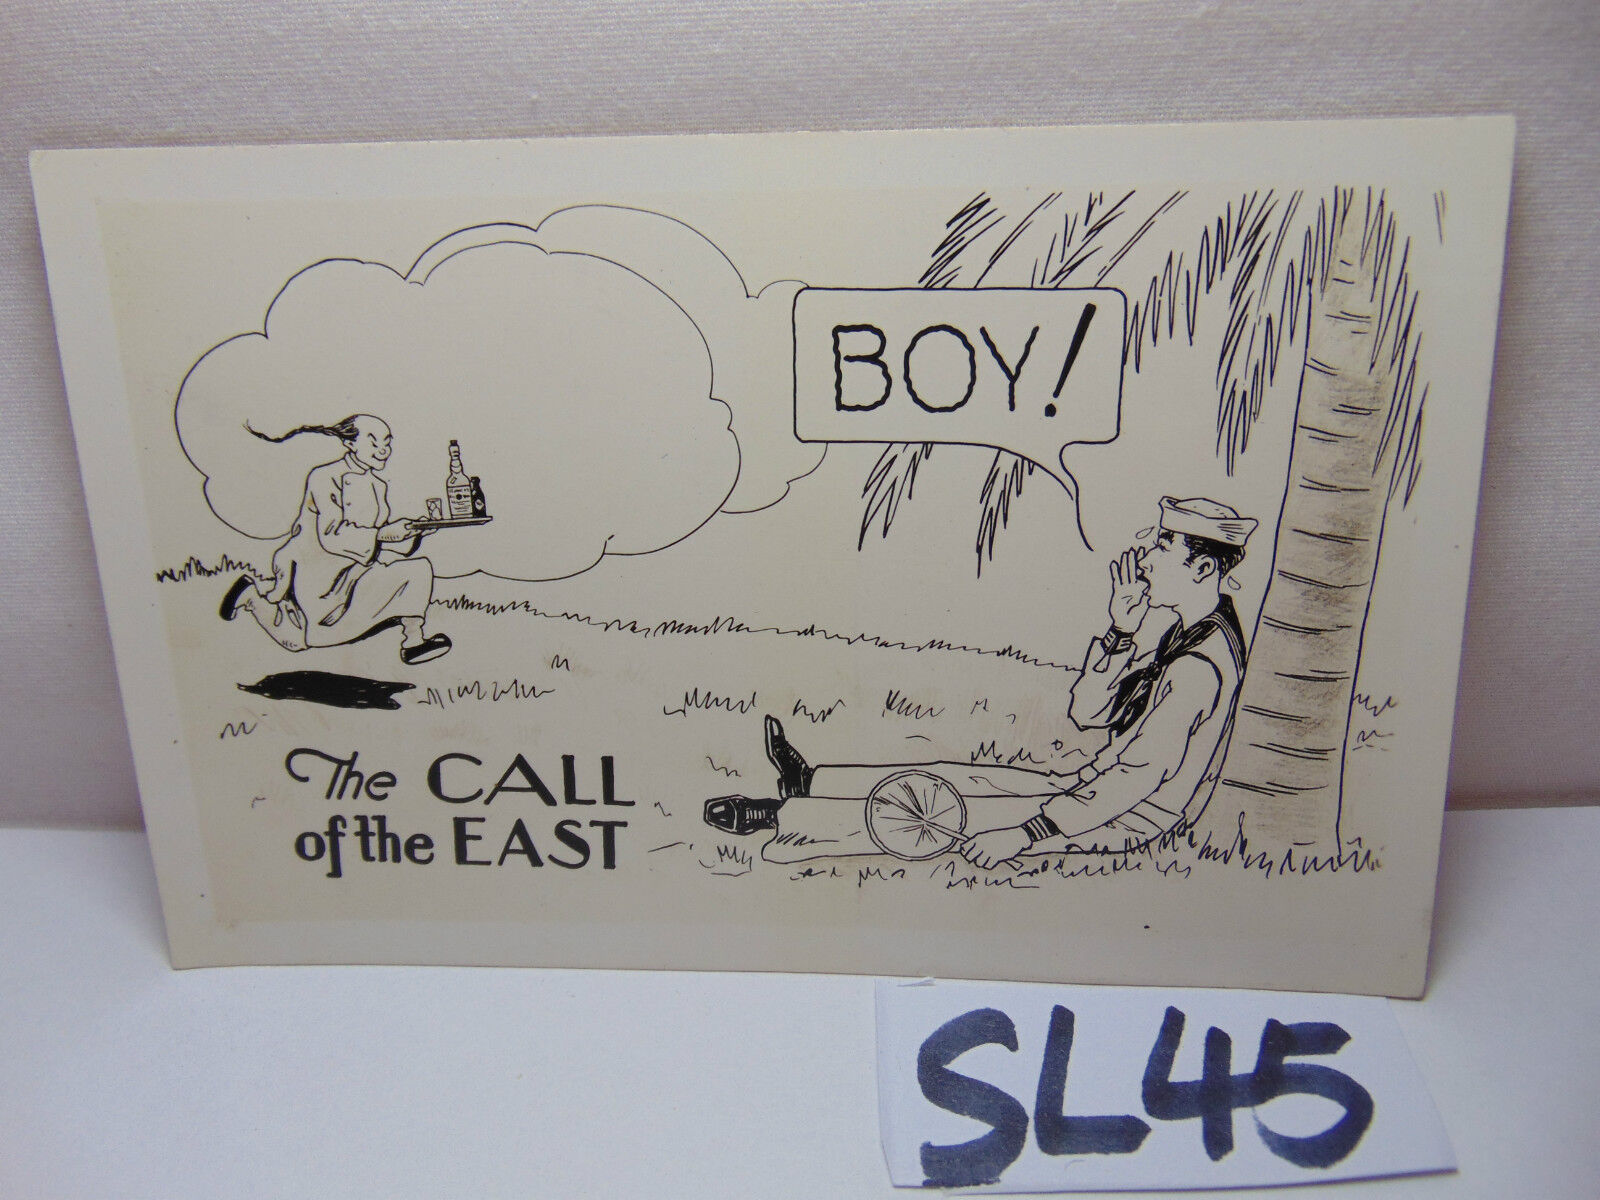 VINTAGE 1920'S US NAVY PICTURE POSTCARD COMIC THE CALL OF THE EAST SERVANT BOY 